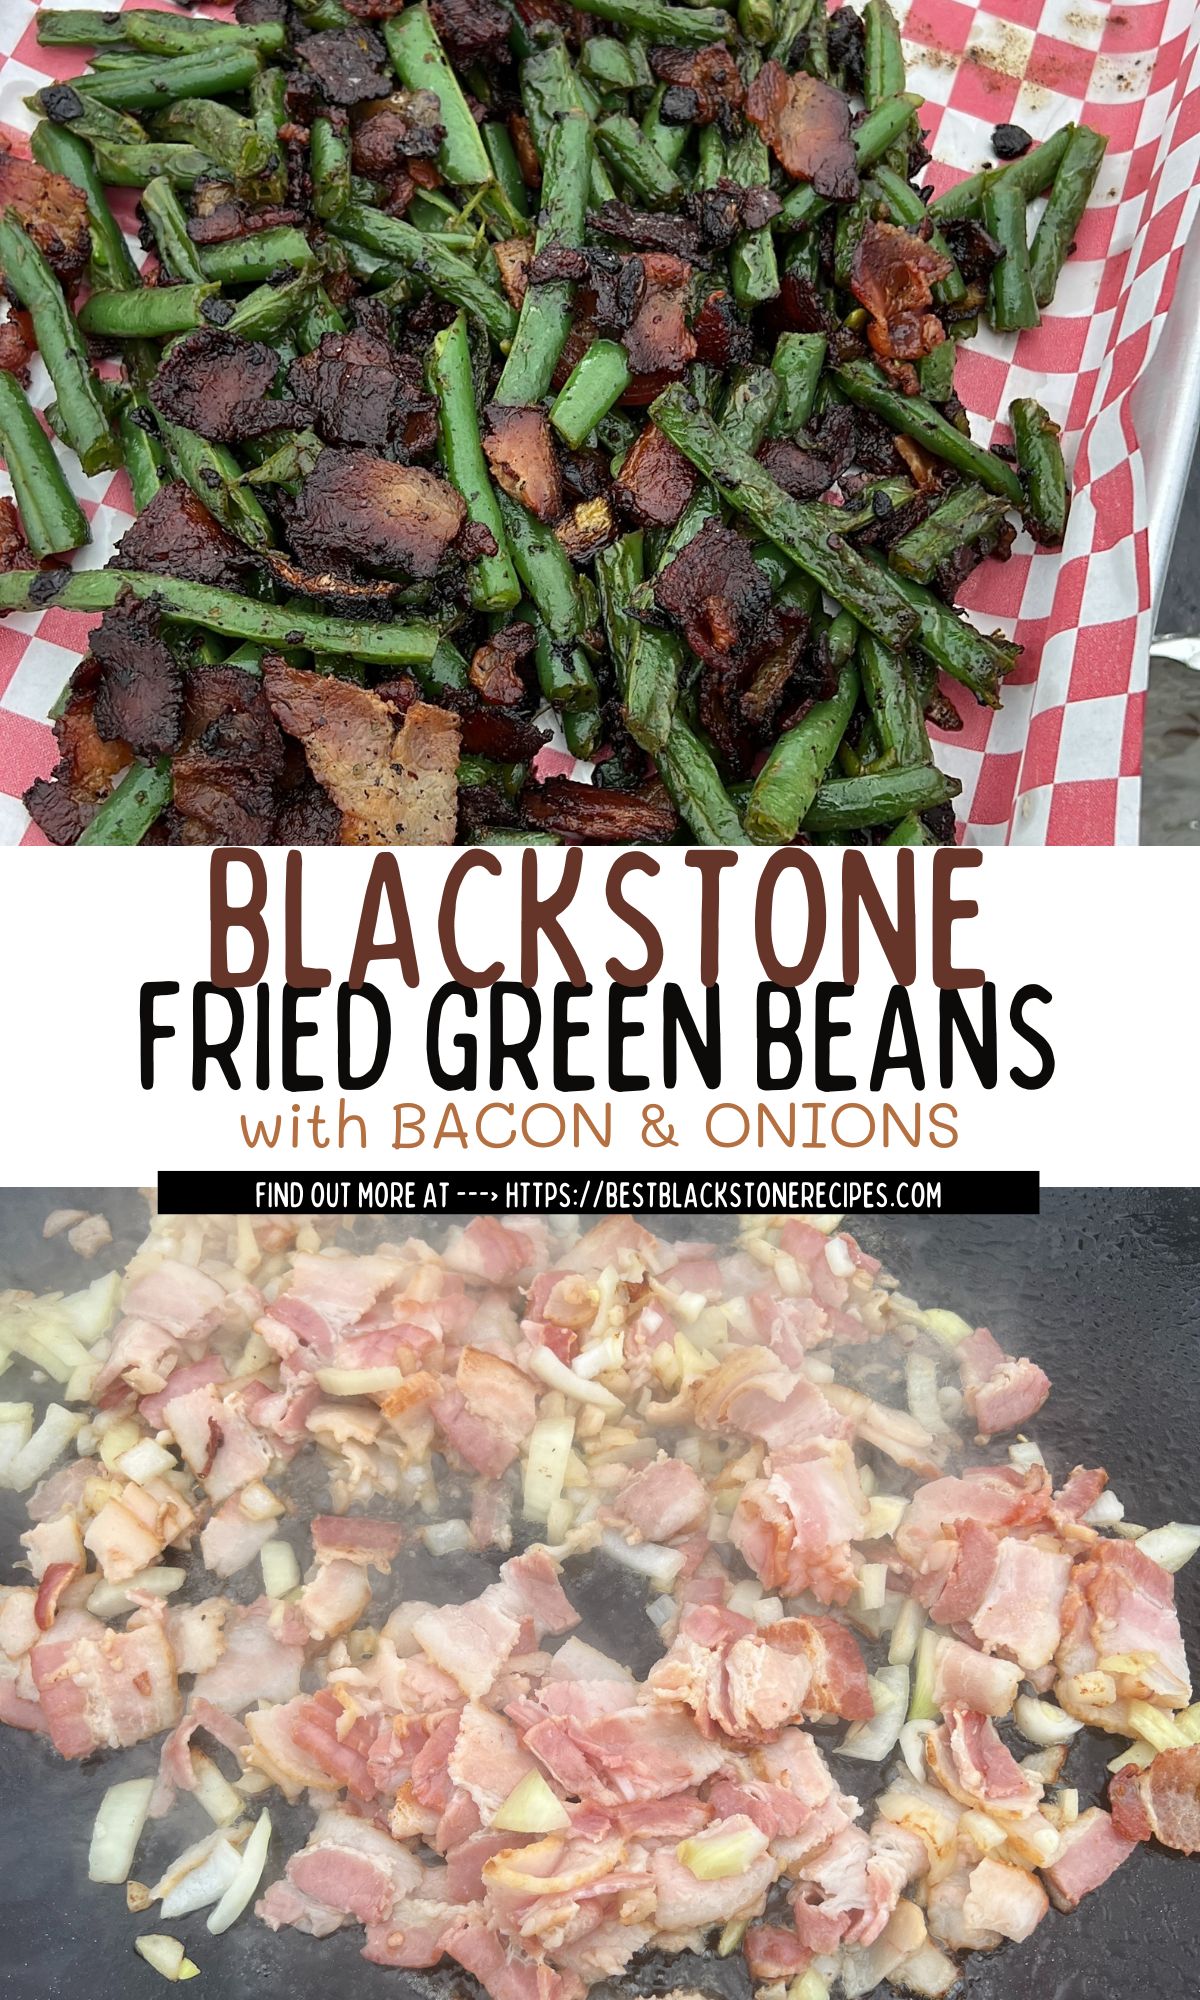 Top image of green beans and steak strips on a checkered paper, bottom image of bacon and onions cooking, with "blackstone fried green beans with bacon & onions" text overlay.